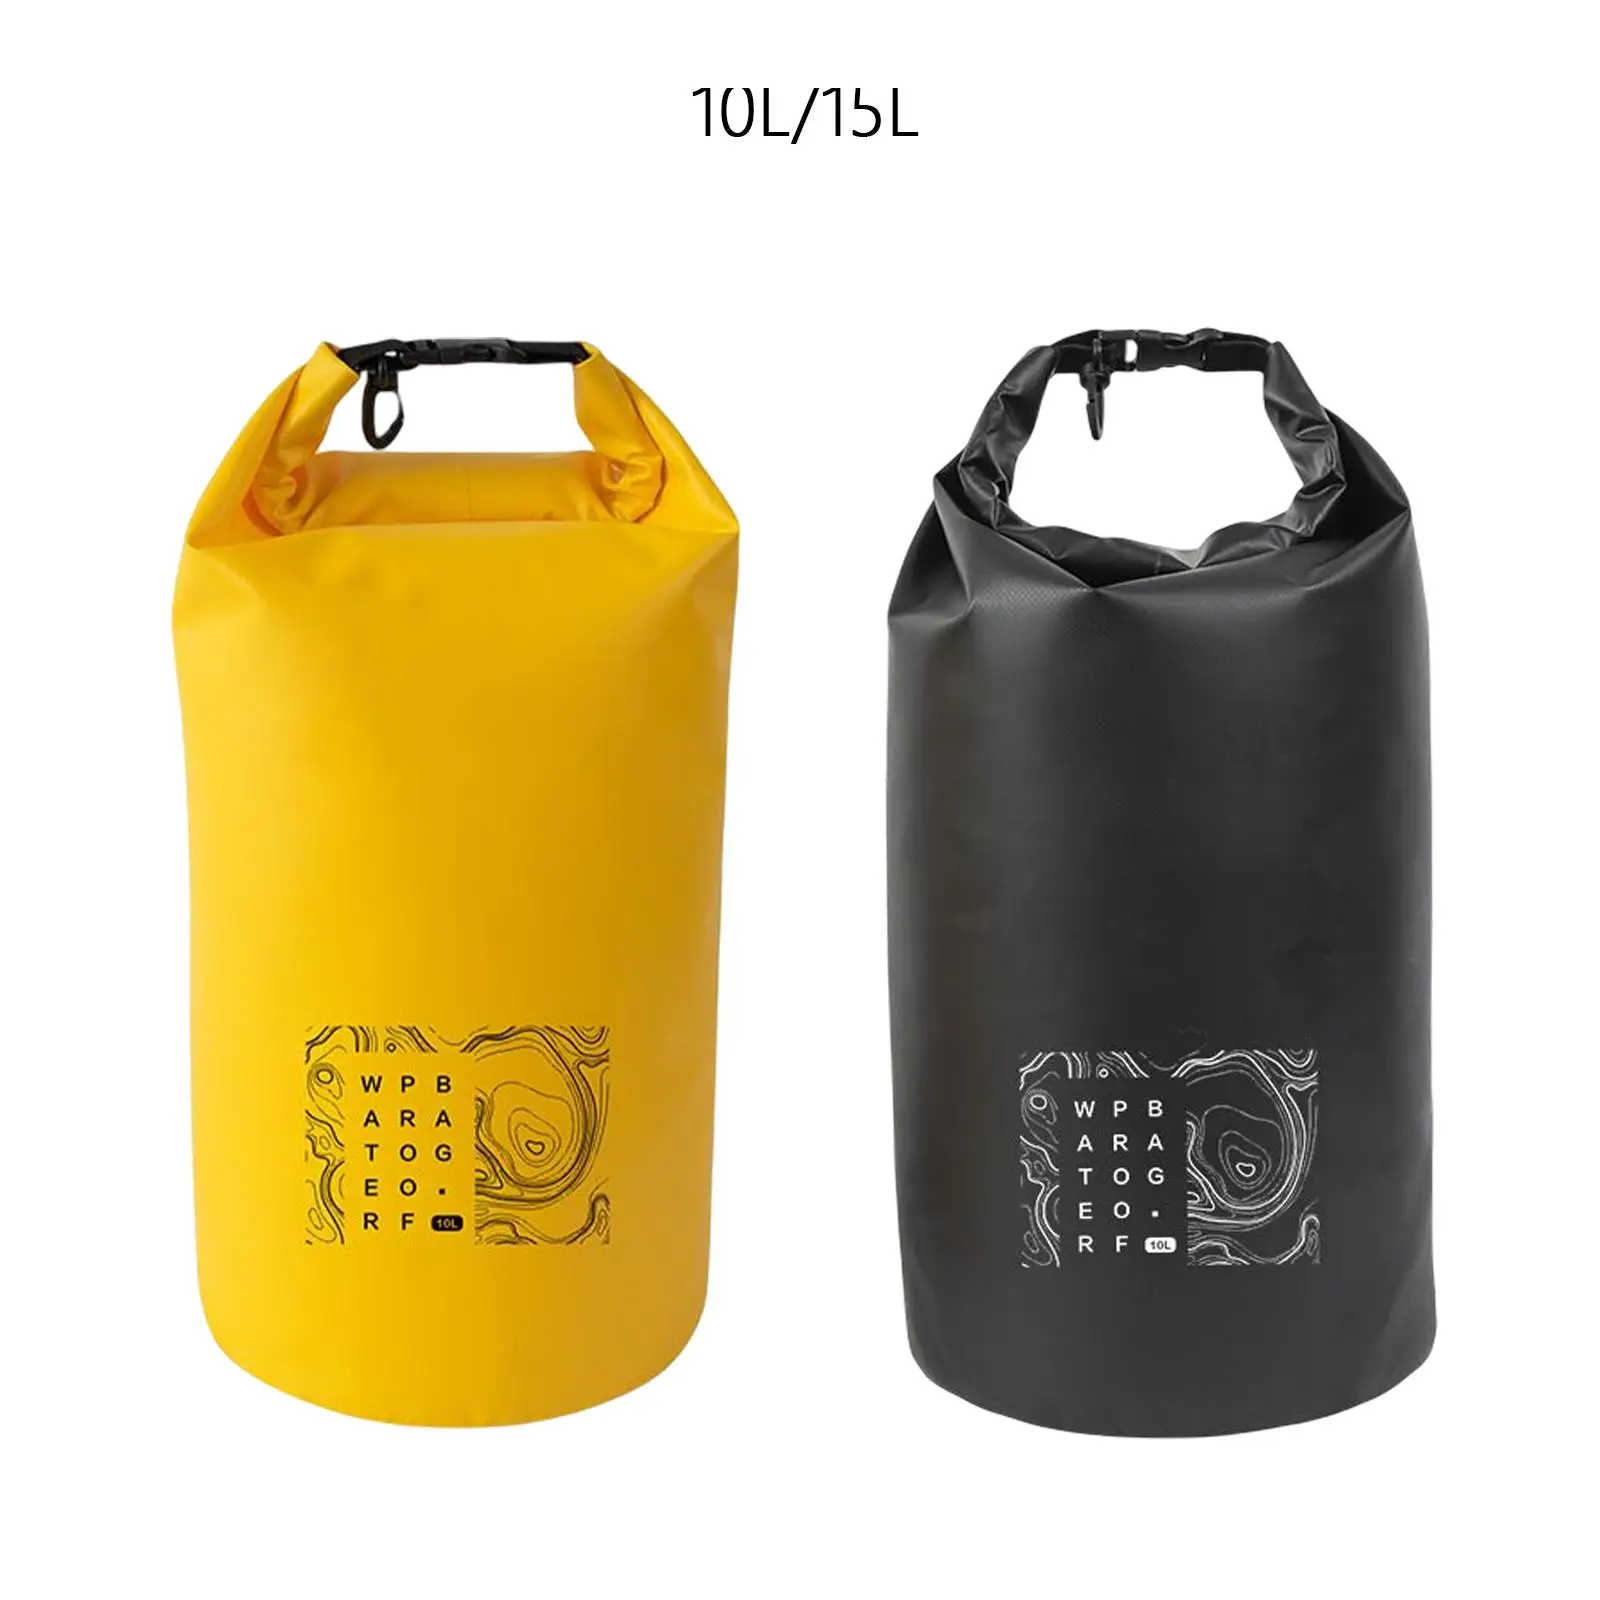 10/15L PVC Floating Bag Waterproof Waist Pouch Waterproof Bag Dry Bag Storage Pack Pouch for Beach Swimming Surfing Boating